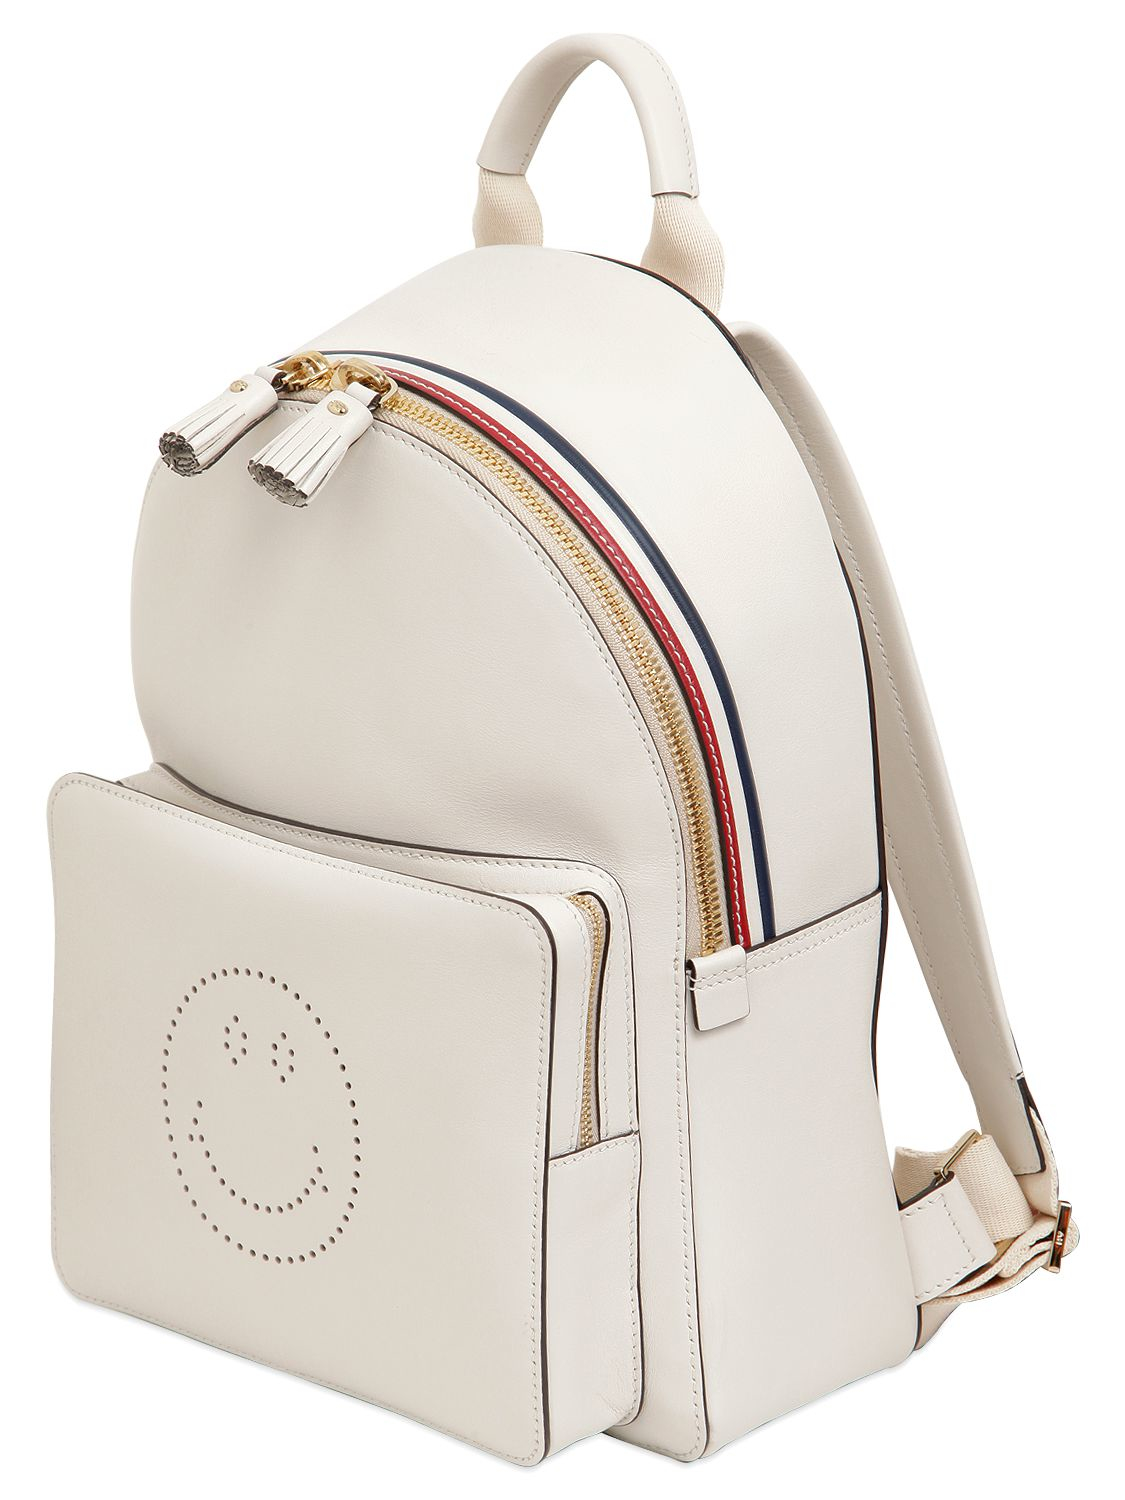 Anya hindmarch Smiley Sporty Stripes Mini Backpack in White (OFF WHITE) | Lyst